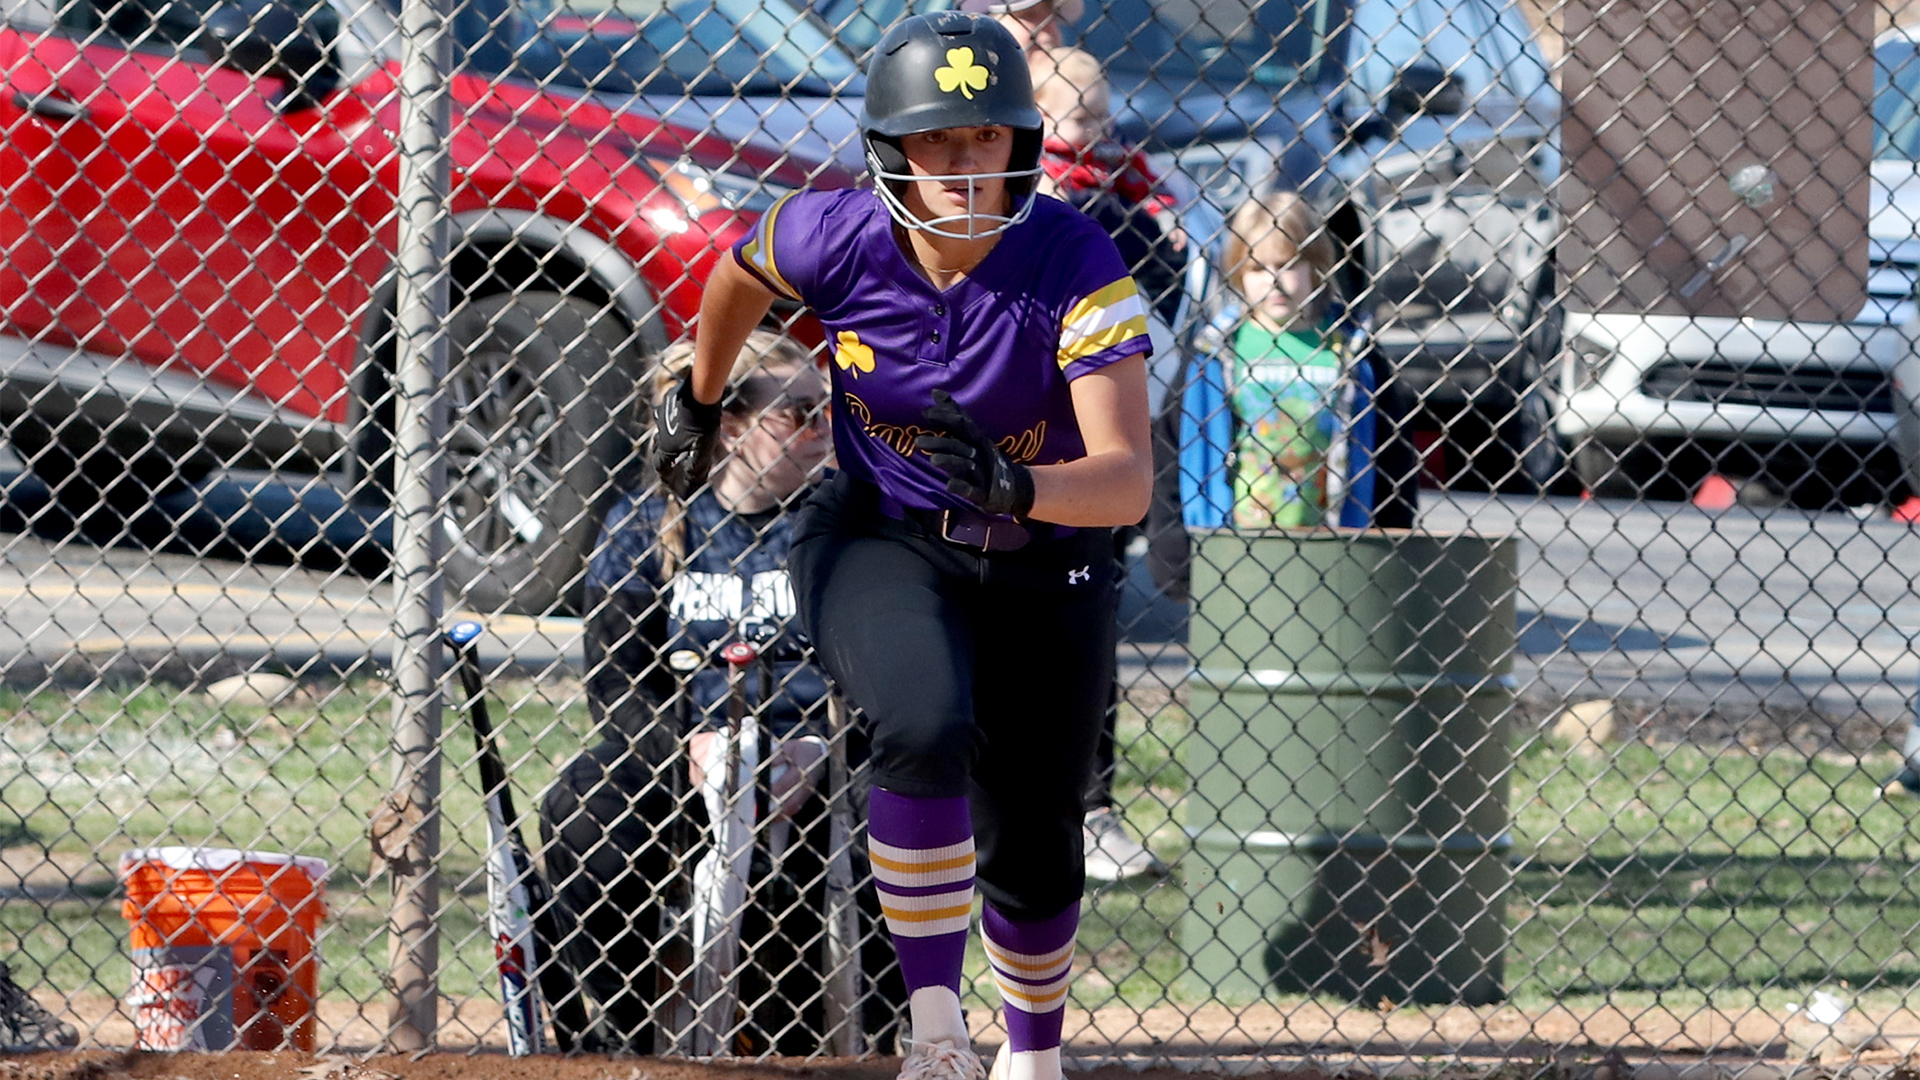 Megan Pollinger hit her first home run of the season in the 10-0 win over Schuylkill. Photo by Robert Cifone.